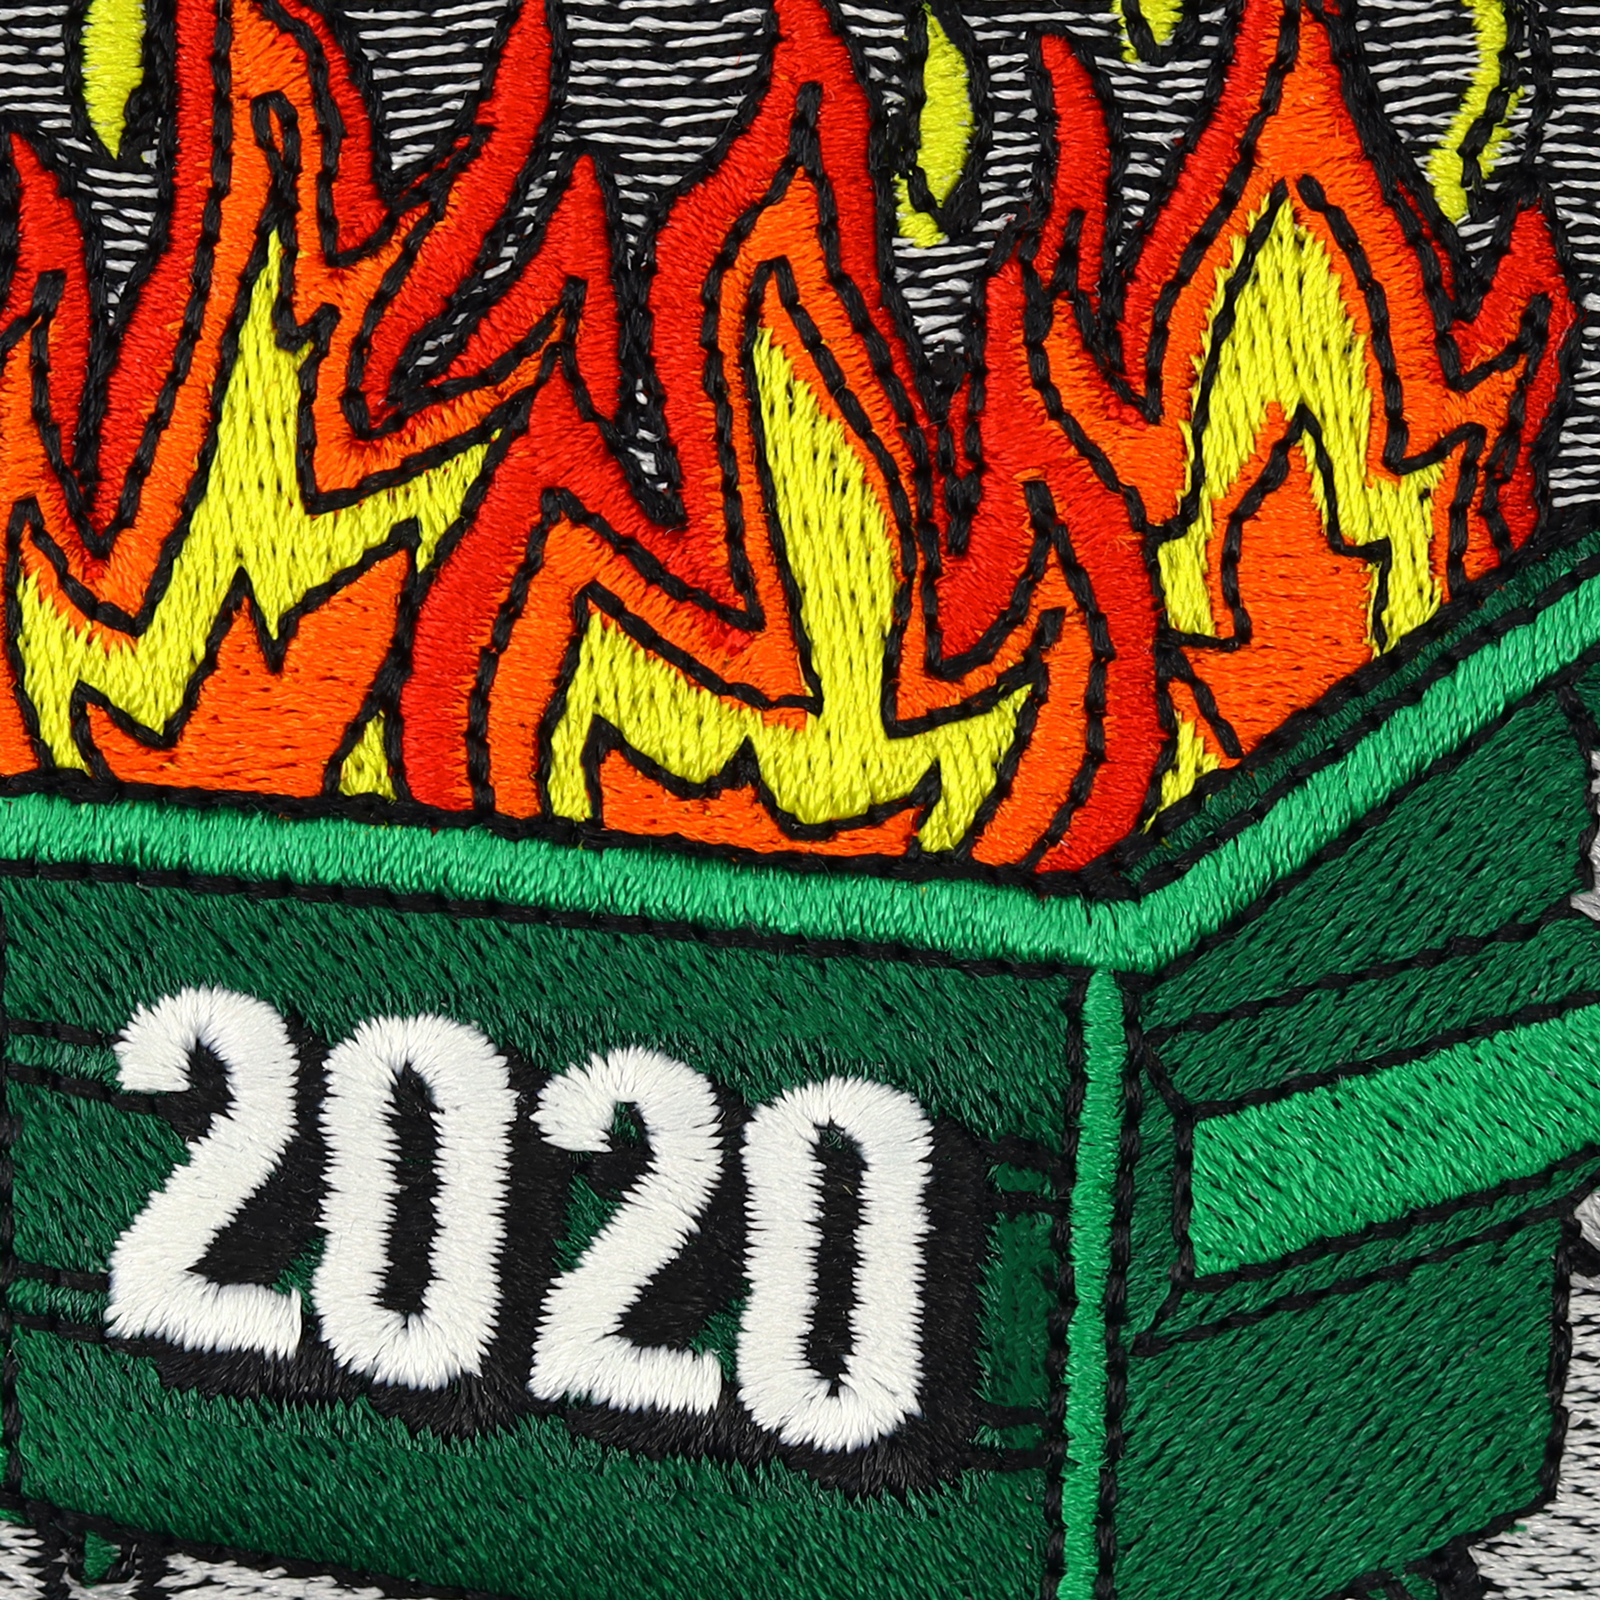 2020 burning - Patch